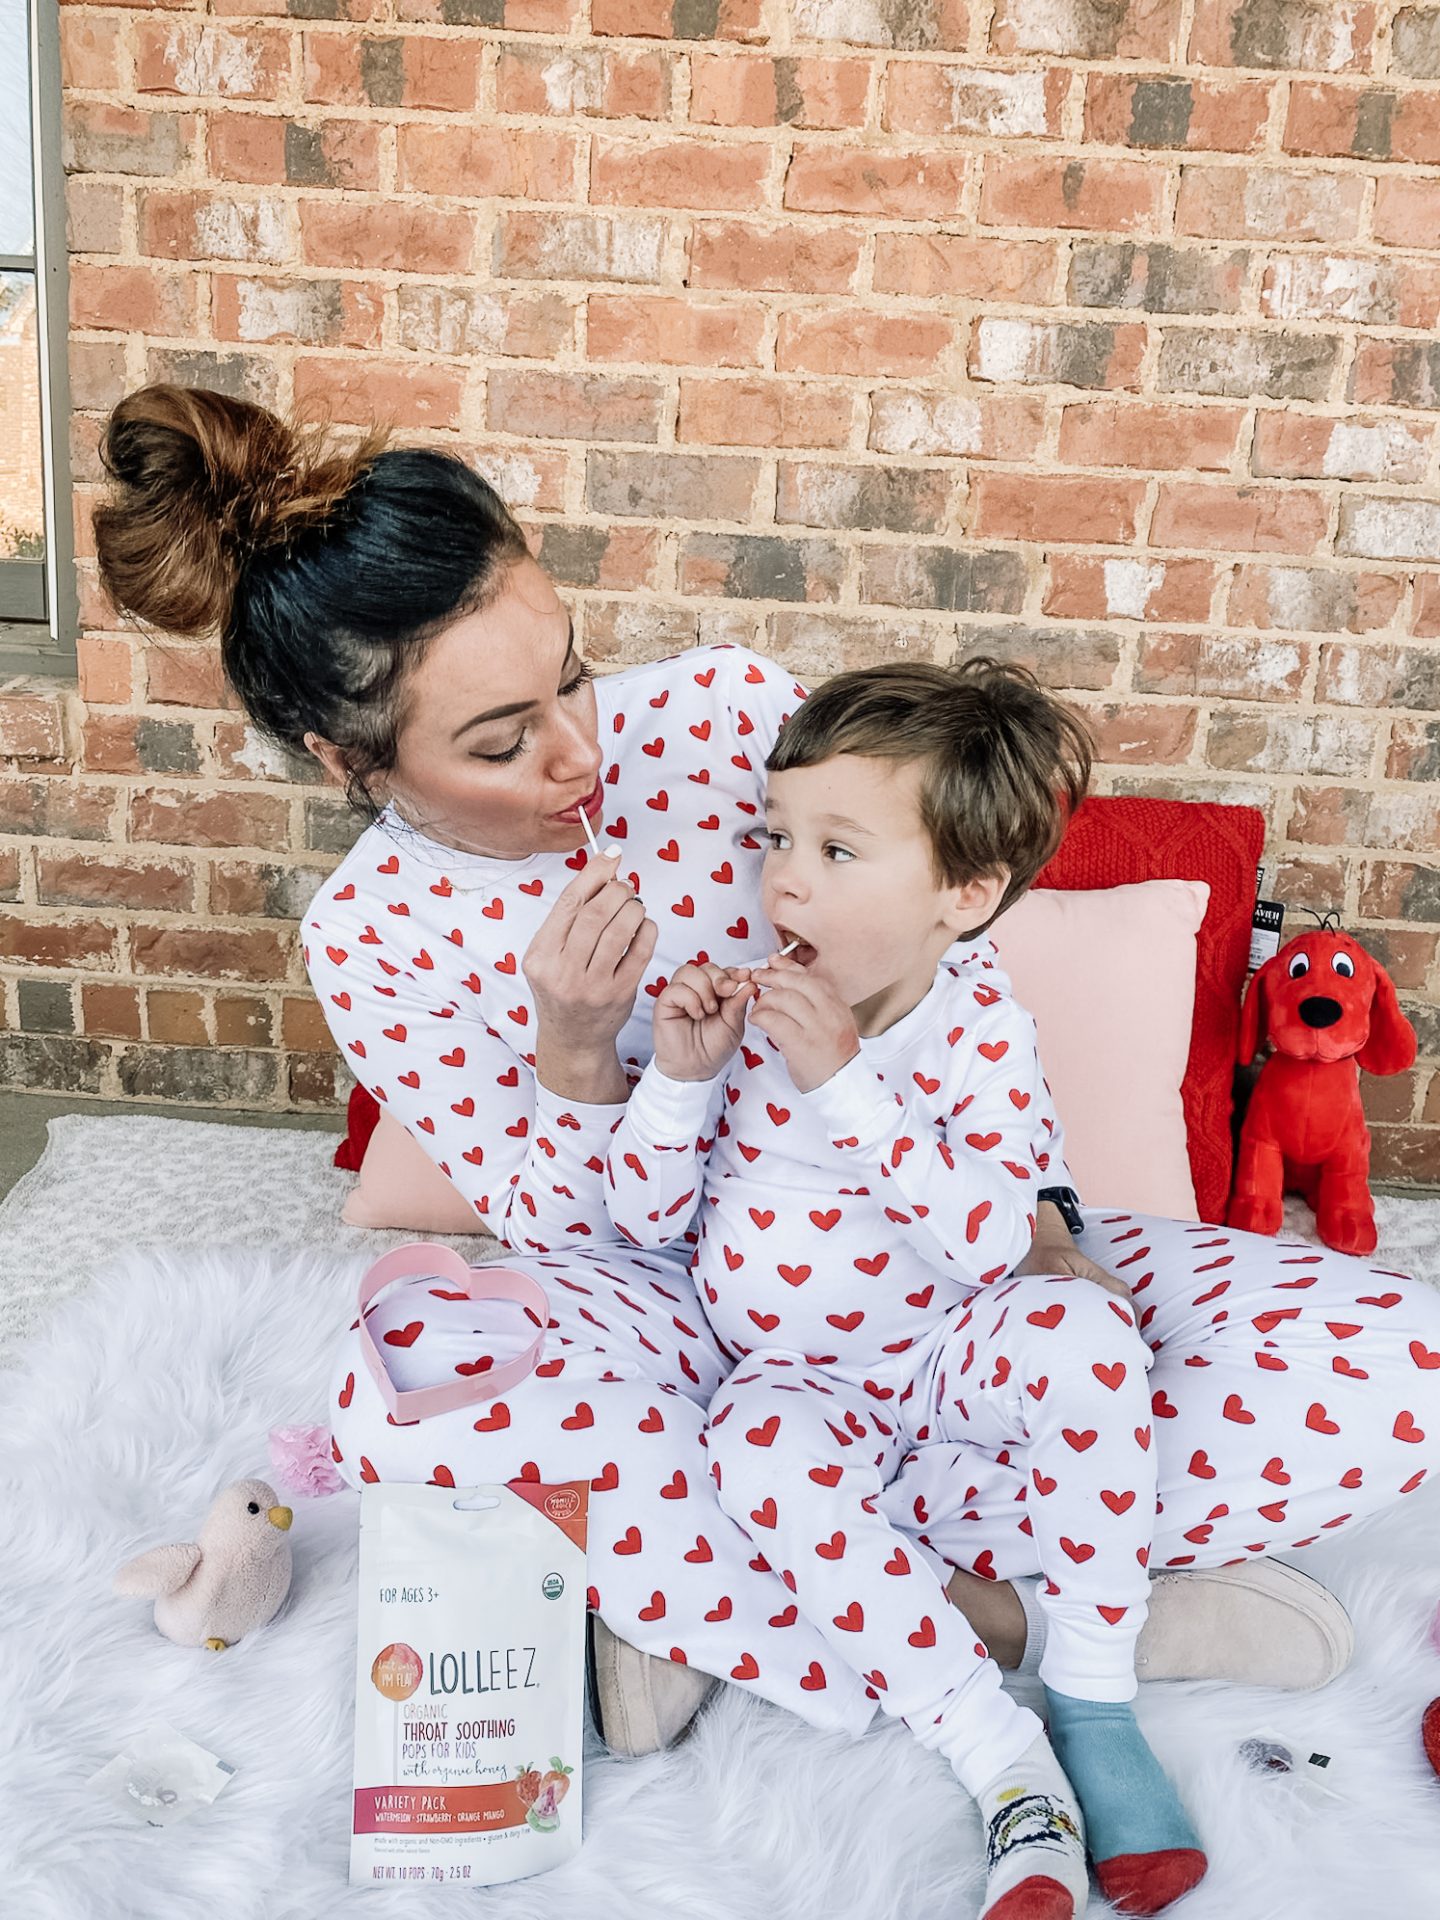 Valentines Day Gift Ideas For Boys & Girls by Alabama mom + lifestyle blogger, Heather Brown // My Life Well Loved